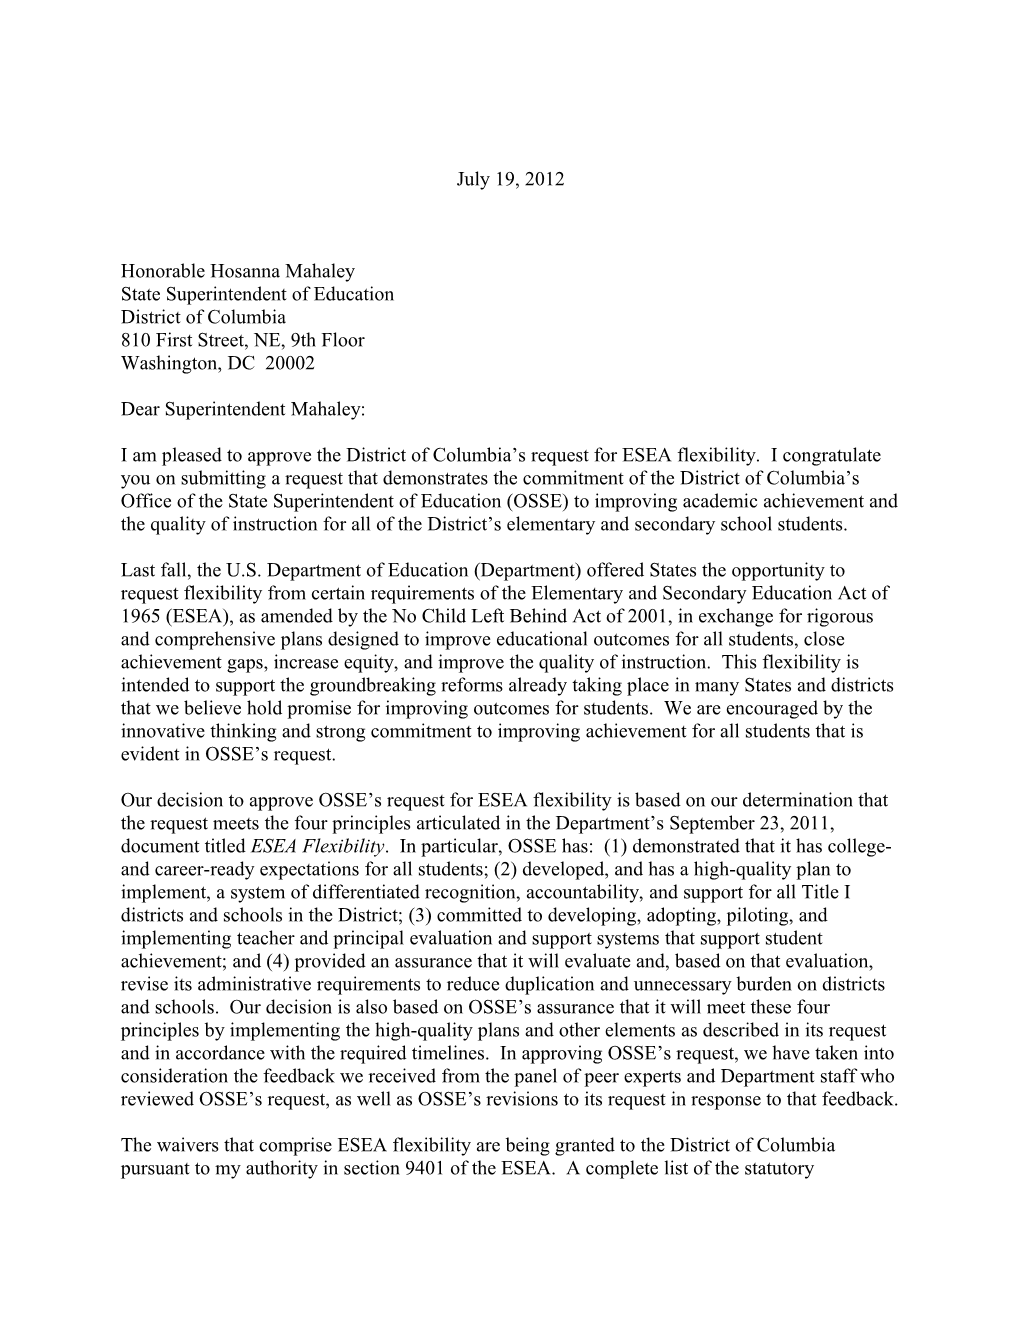 District of Columbia: ESEA Flexibility Requests, Secretary's Approval Letter July 19, 2012